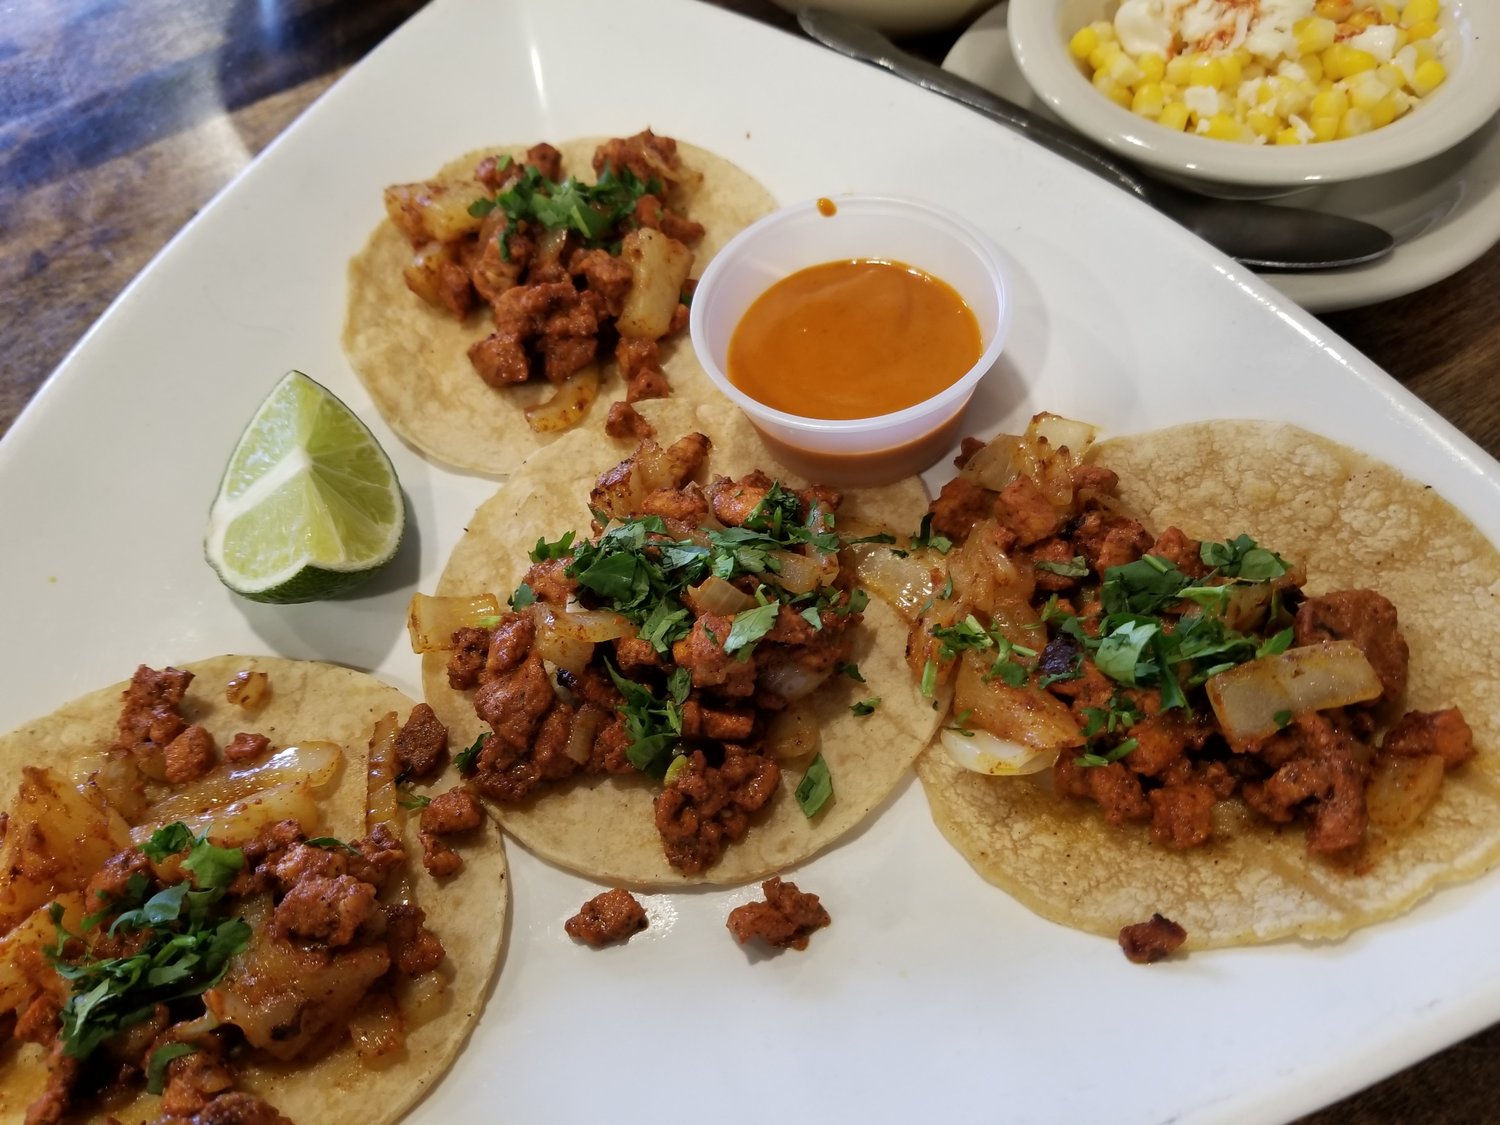 The tacos al pastor at Tacos & Tequila in Mexico are a treat on Tuesday and any day.
[Dave Faries]